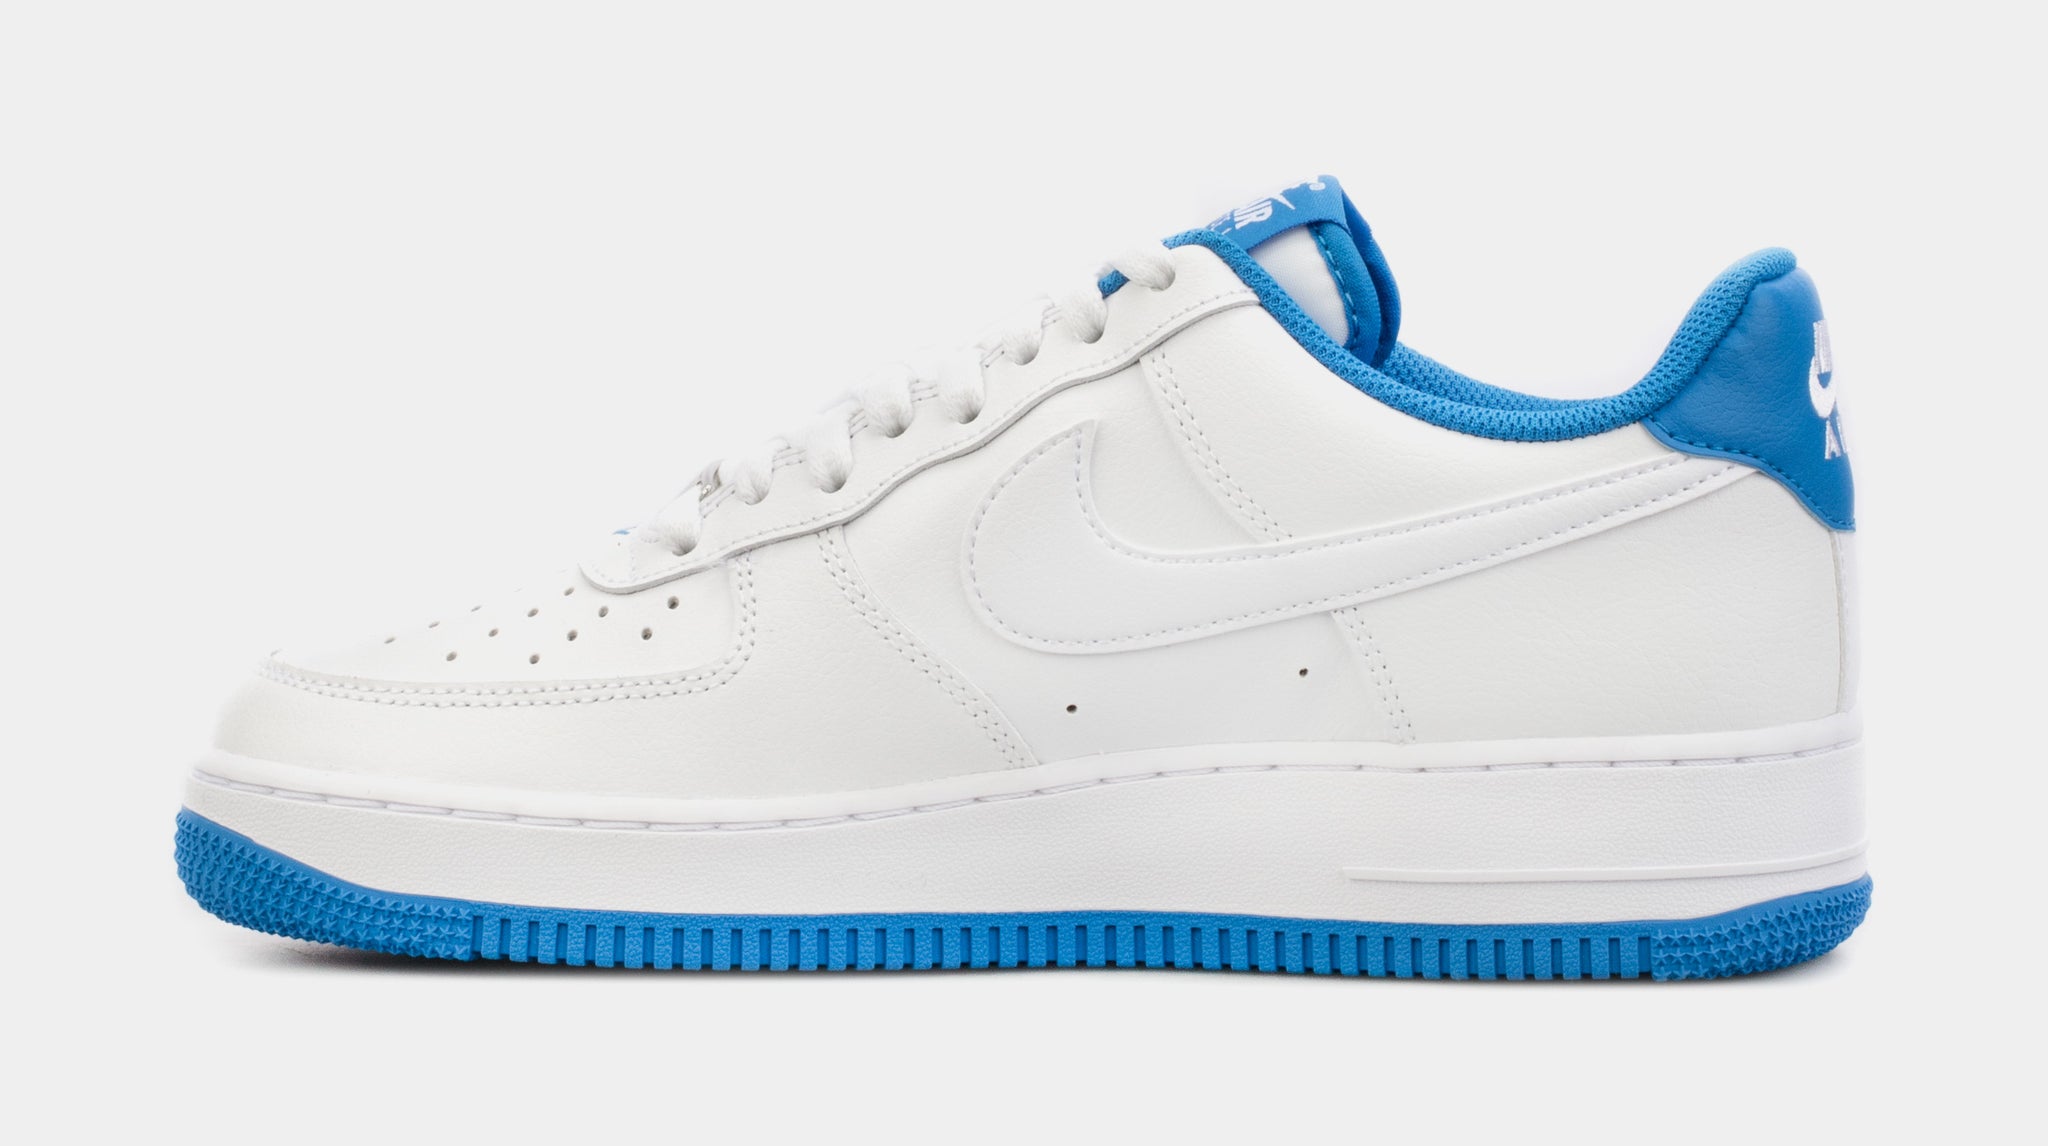 Blue Nike Air Force 1 Low